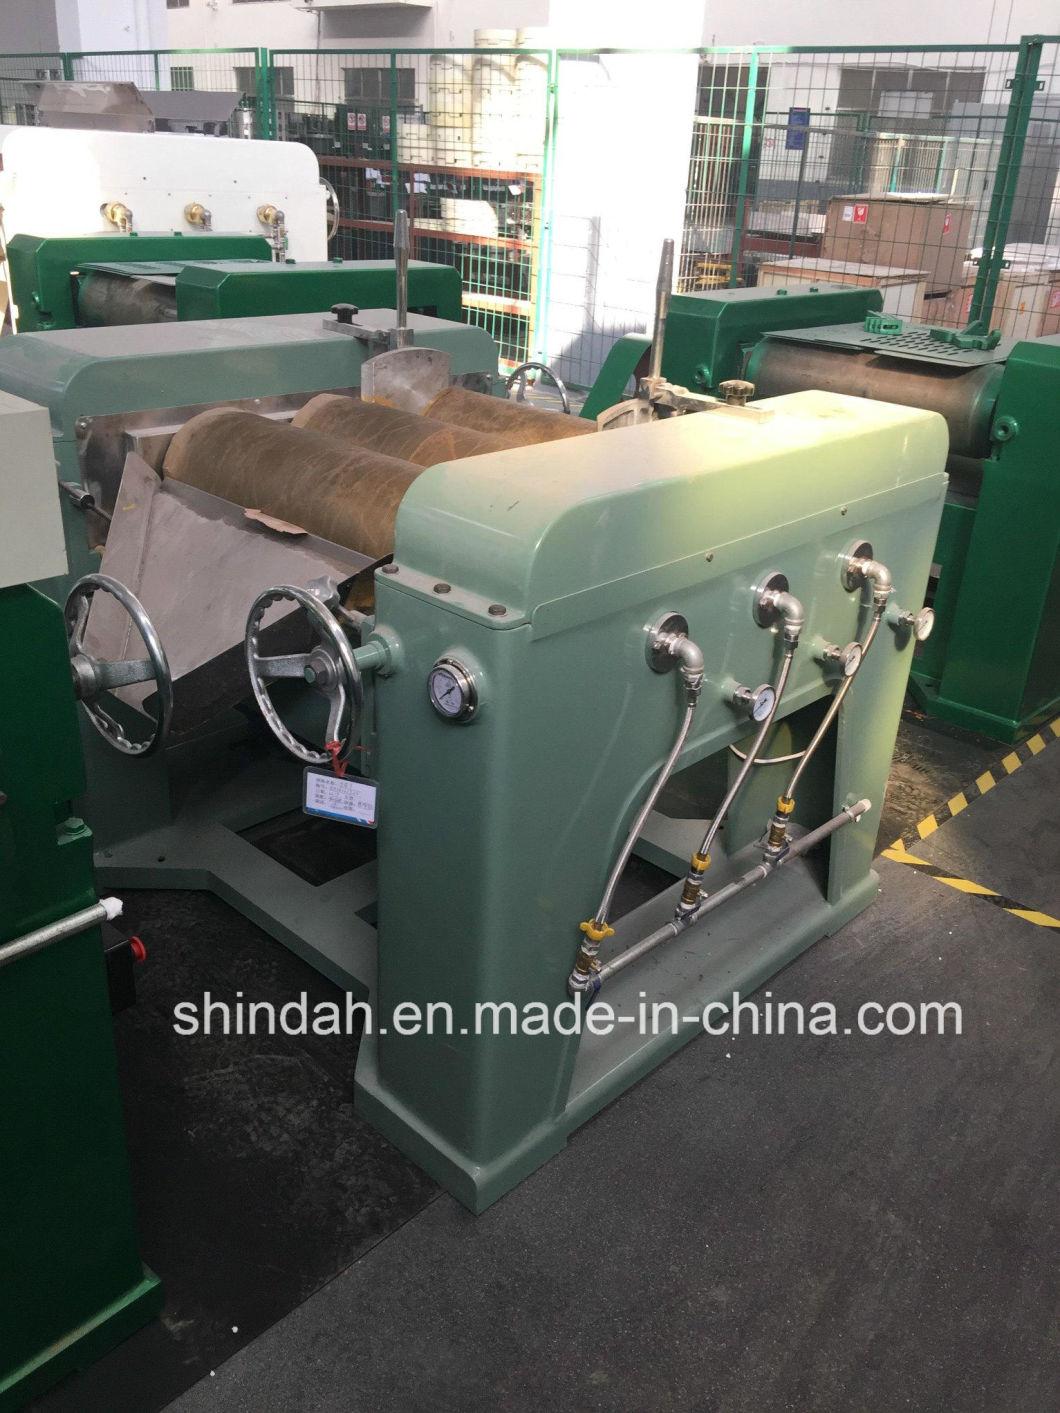 Three Roller Grinder for Grease